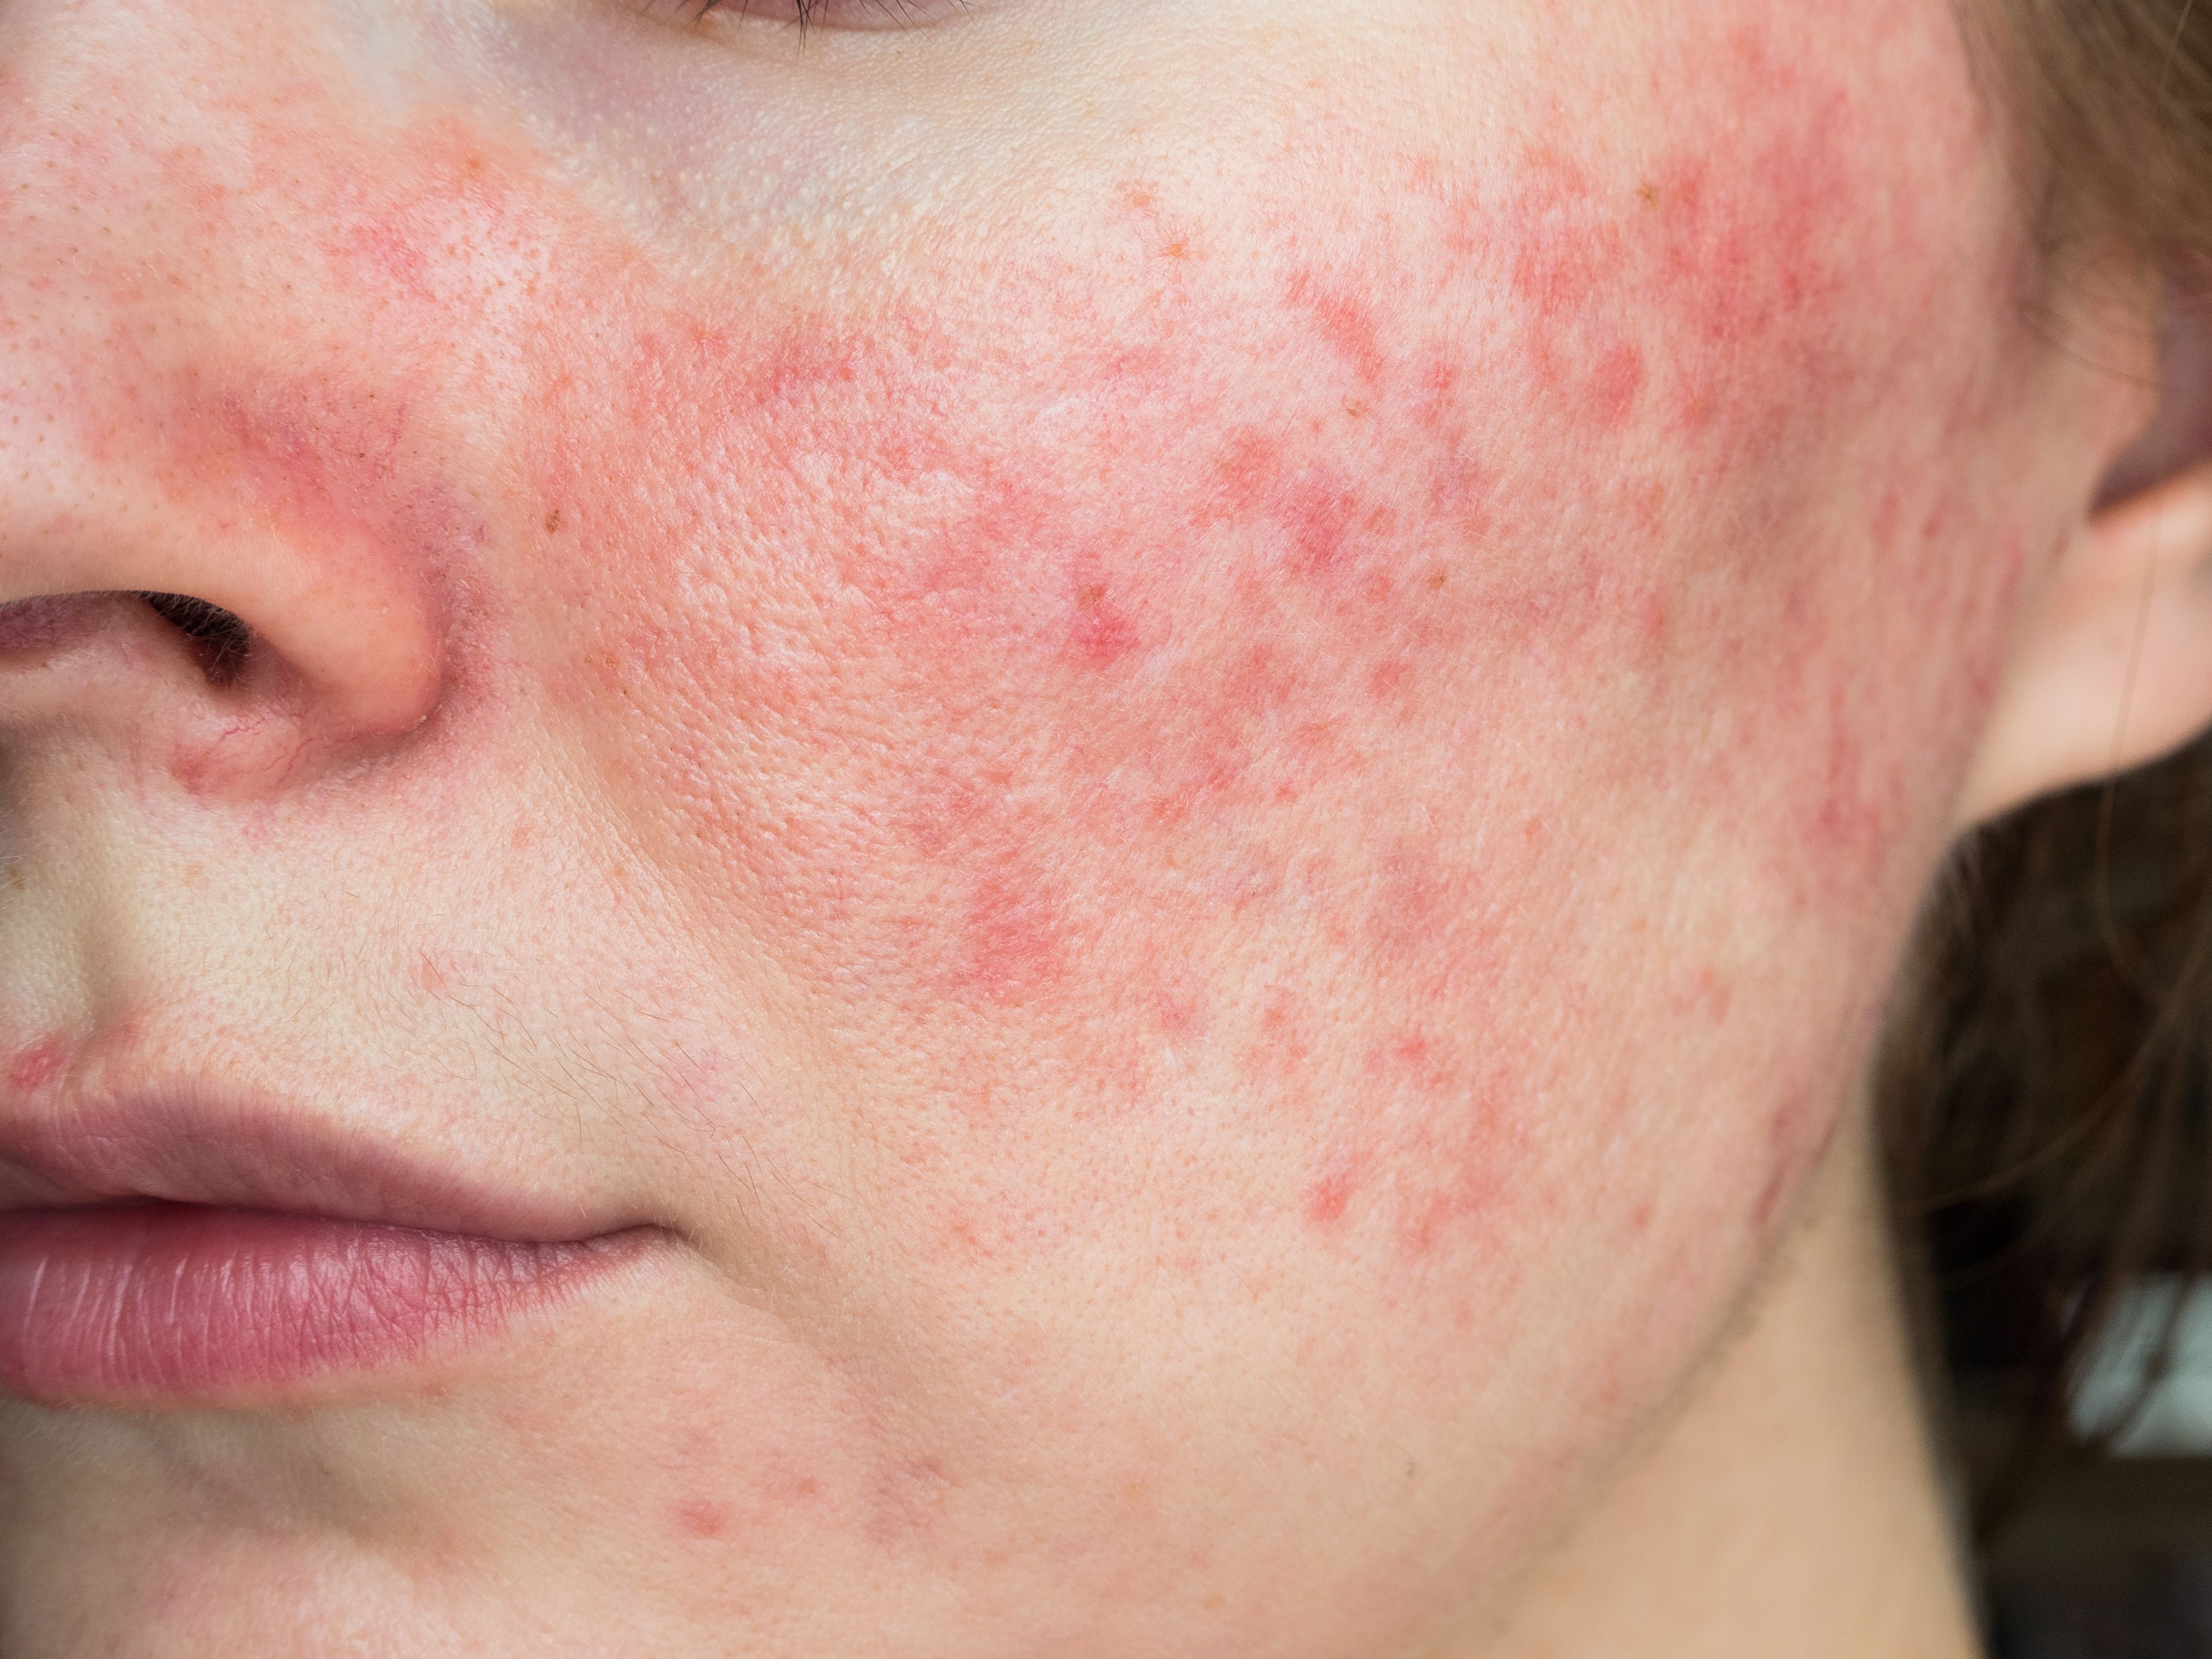 Acne and Rosacea Treatment Pearls